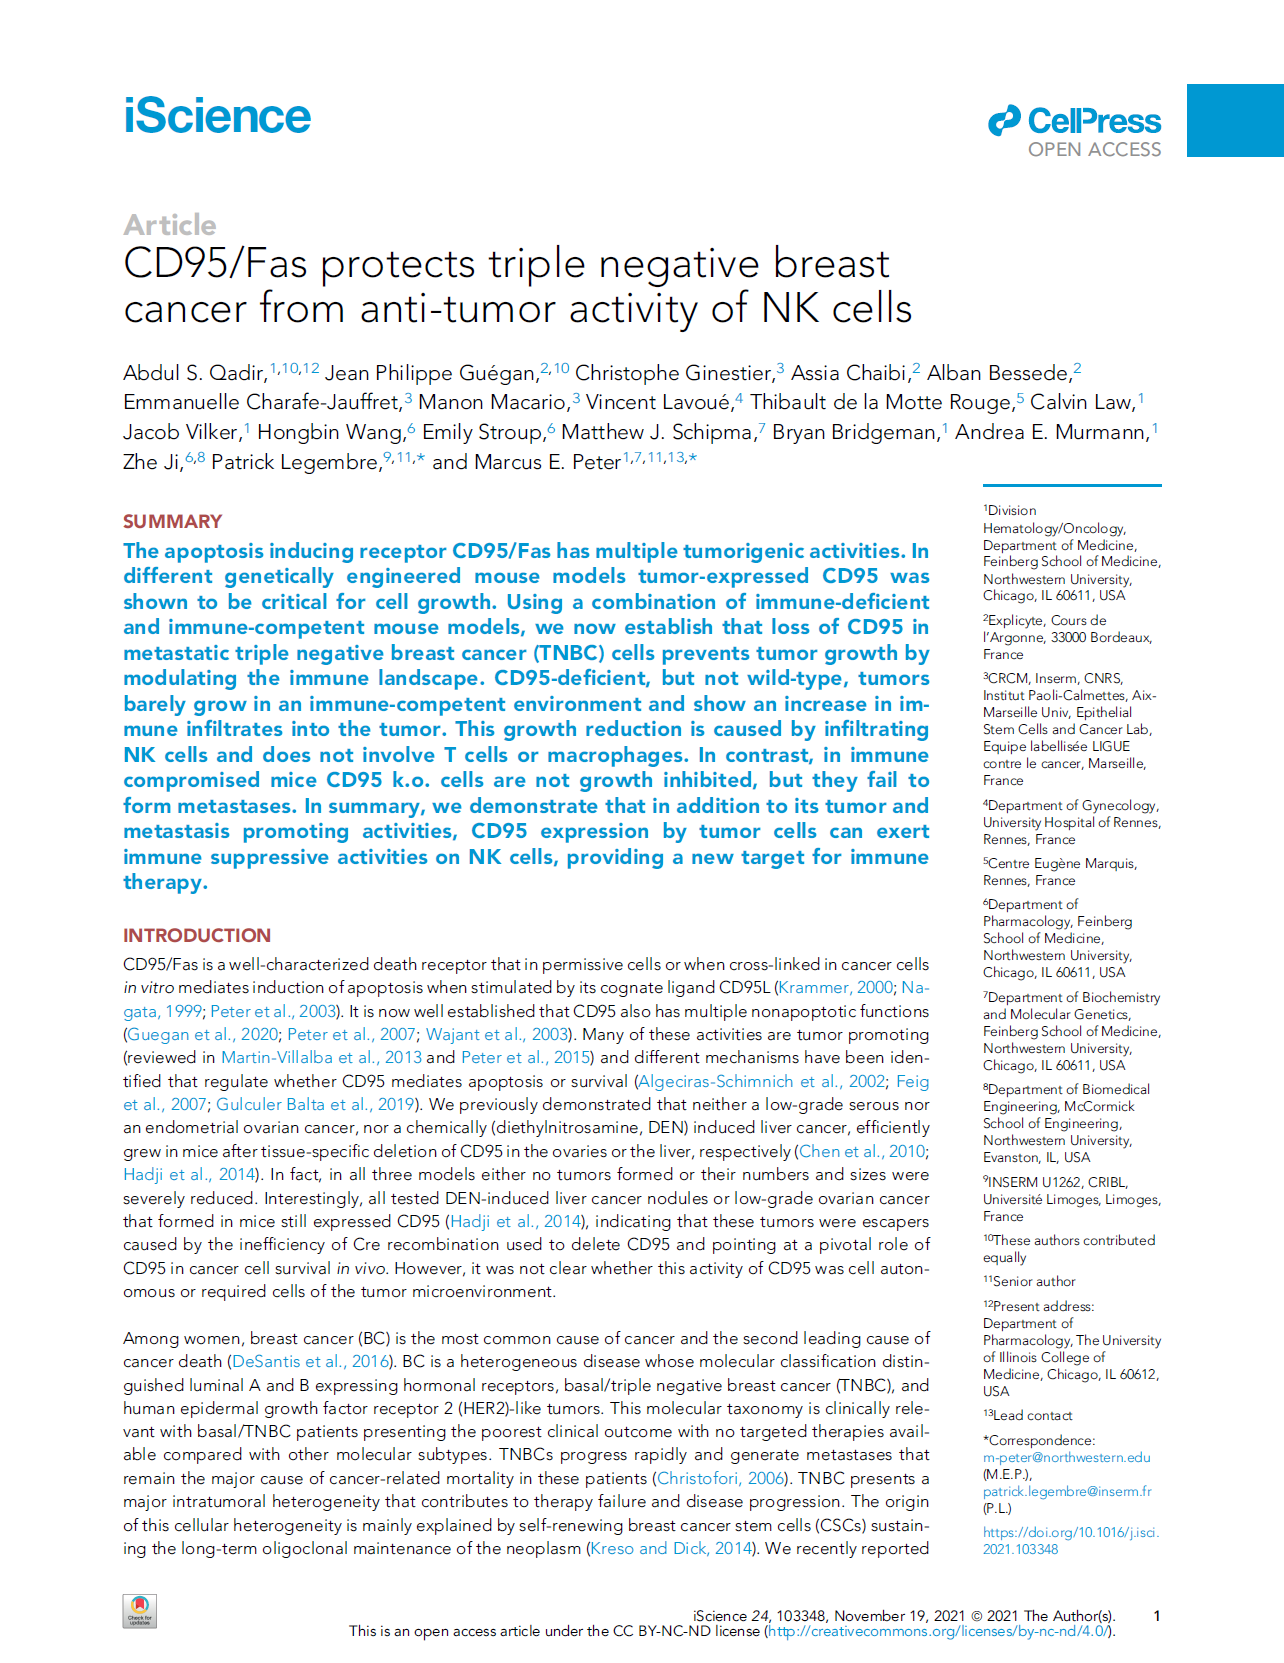 CD95/Fas protects triple negative breast cancer from anti-tumor activity of NK cells